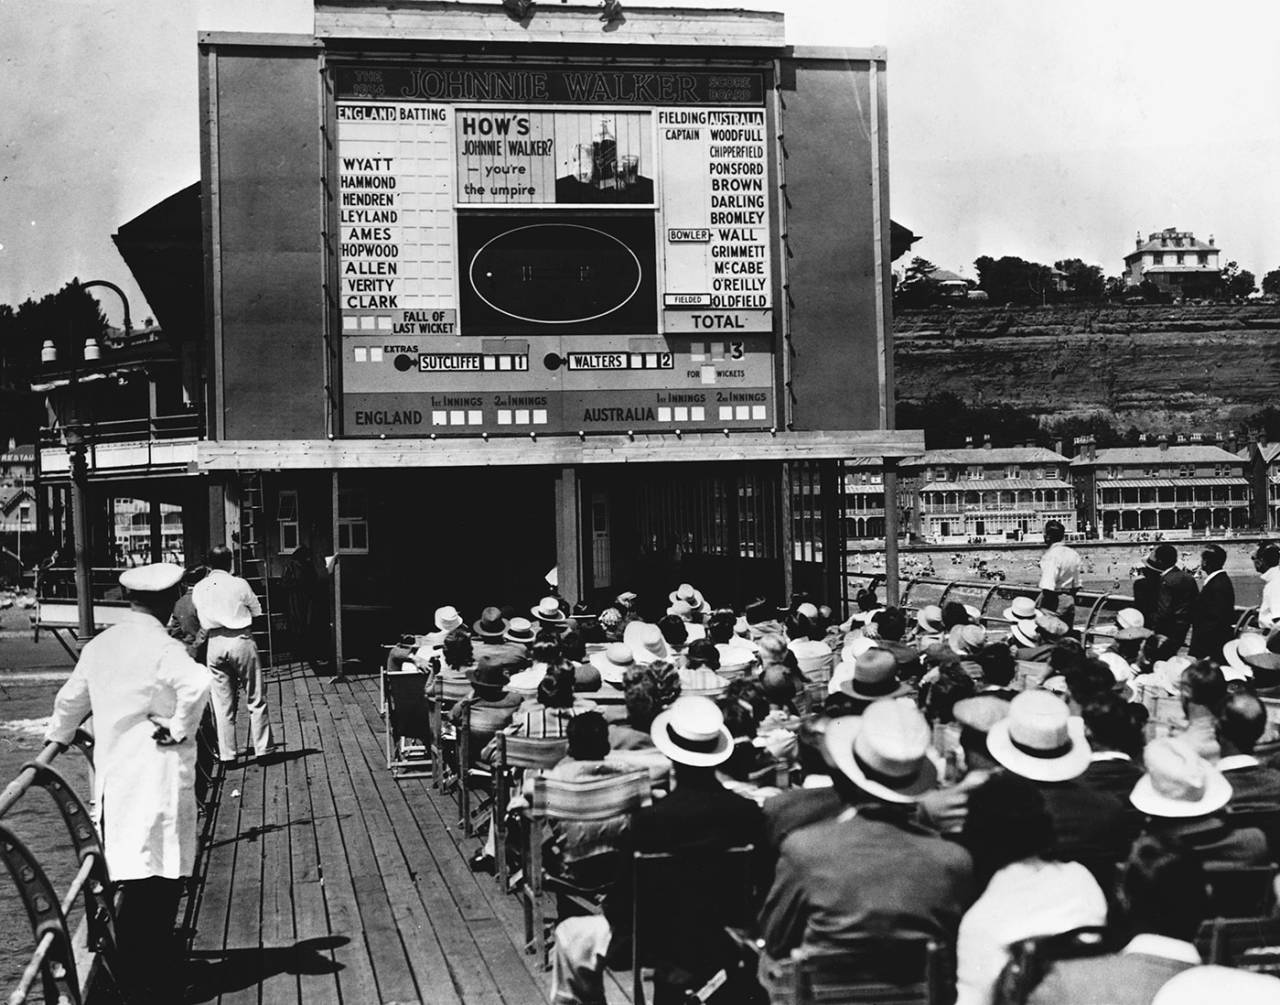 Cricket fans in the Isle of Wight follow the 1934 Old Trafford Ashes Test through a scoreboard on the pier&nbsp;&nbsp;&bull;&nbsp;&nbsp;Getty Images